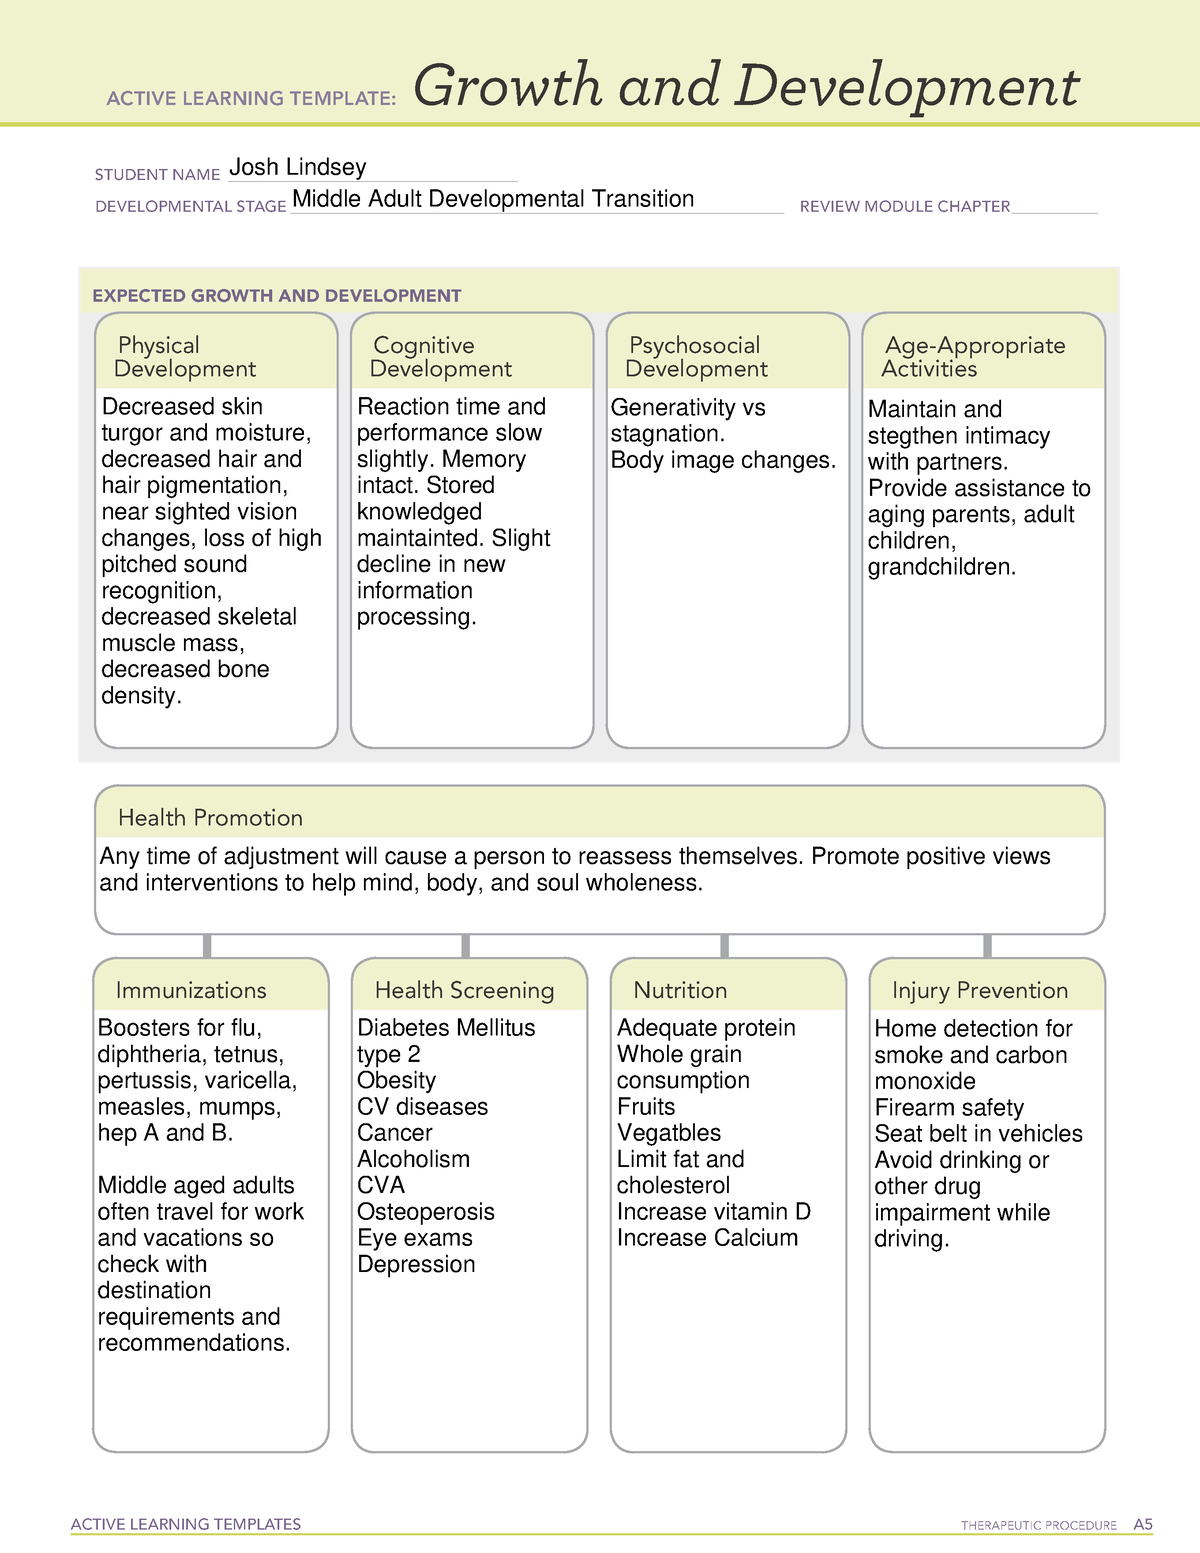 active-learning-template-gand-d-middle-adult-developmental-transition-active-learning